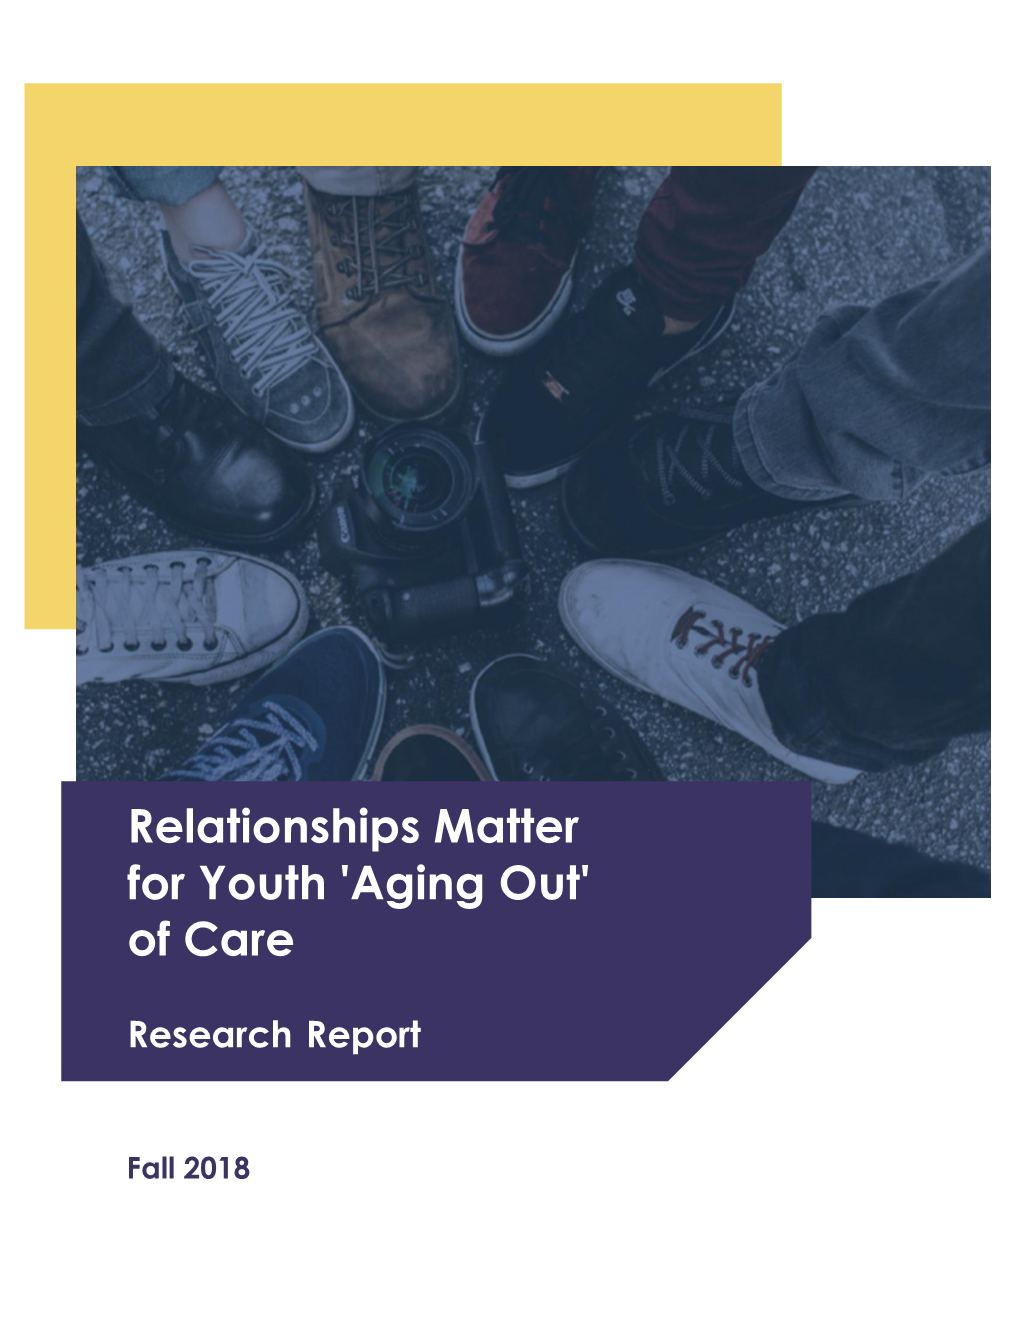 Relationships Matter for Youth 'Aging Out' of Care